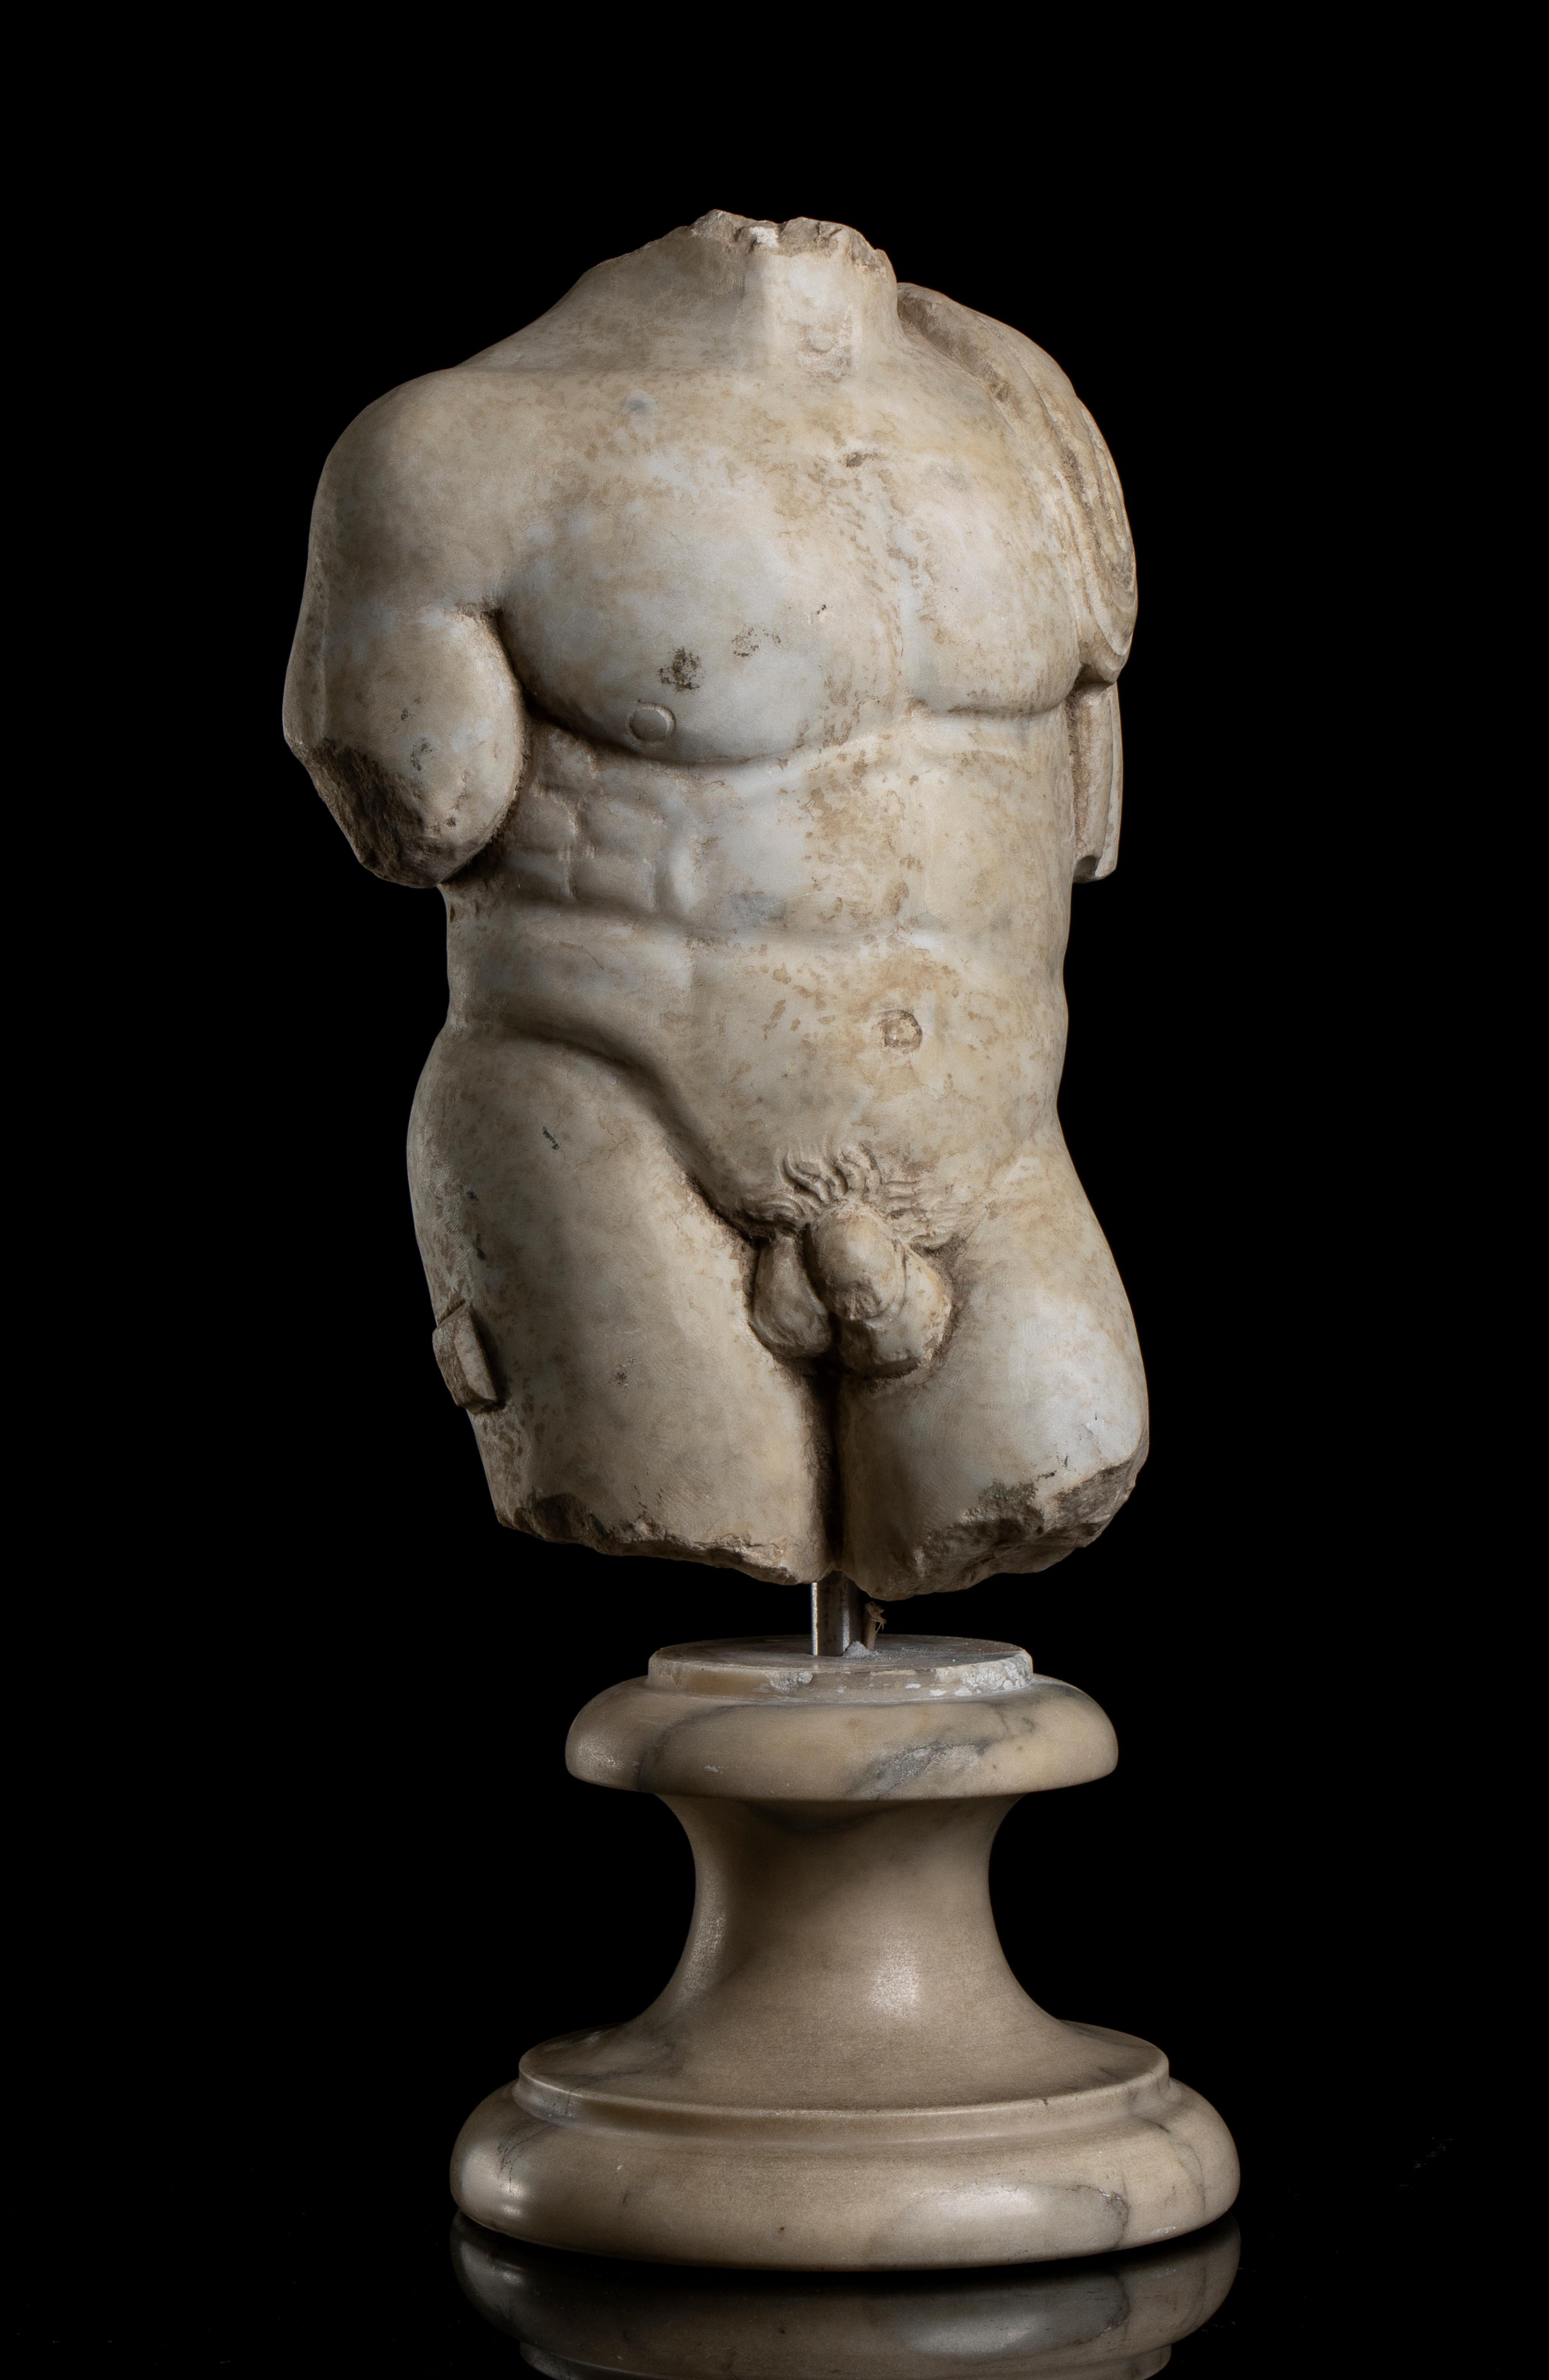 a white marble statuary aged torso sculpture of Heracles, standing on a three order circular white veined marble with a stainless steel pin.
The sculpture anatomically and detailed carved present a body of a young Hercules in contrapposto position